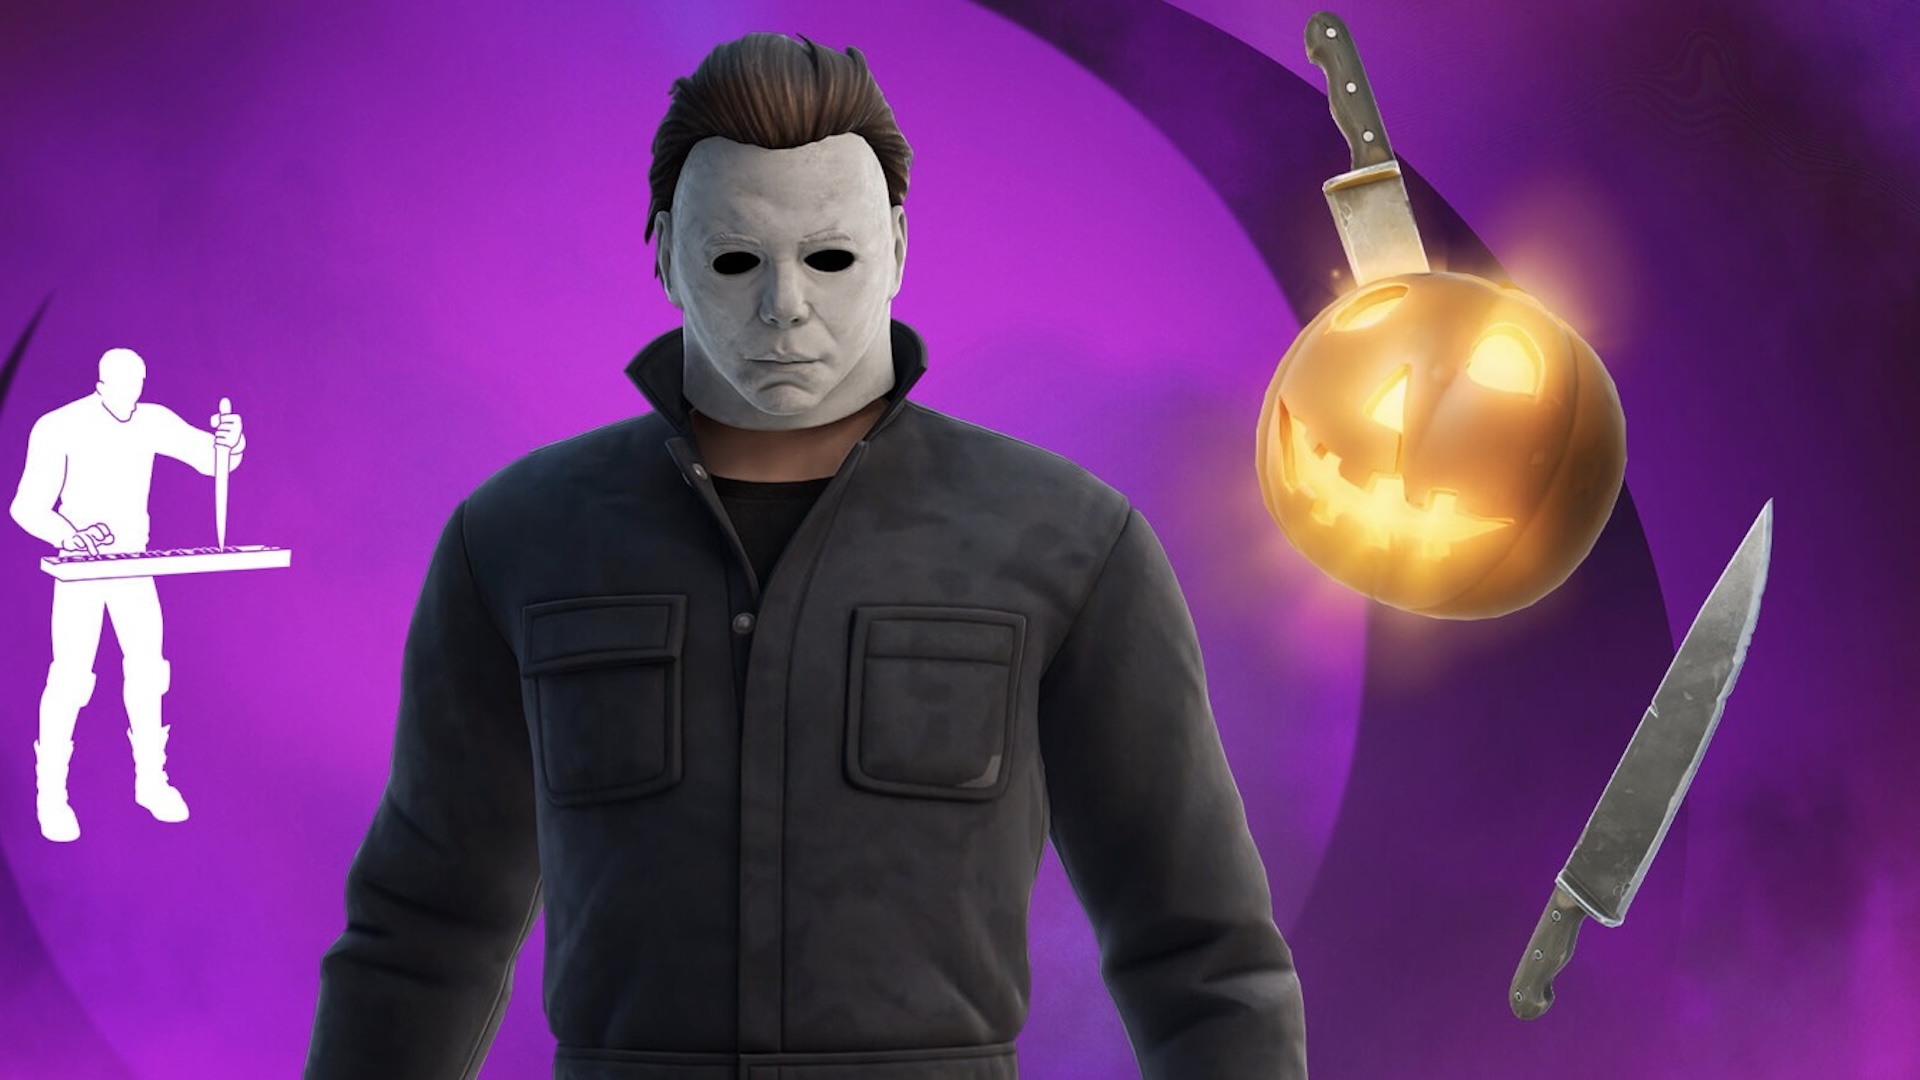 Fortnite adds iconic Halloween killer as part of Fortnitemares event